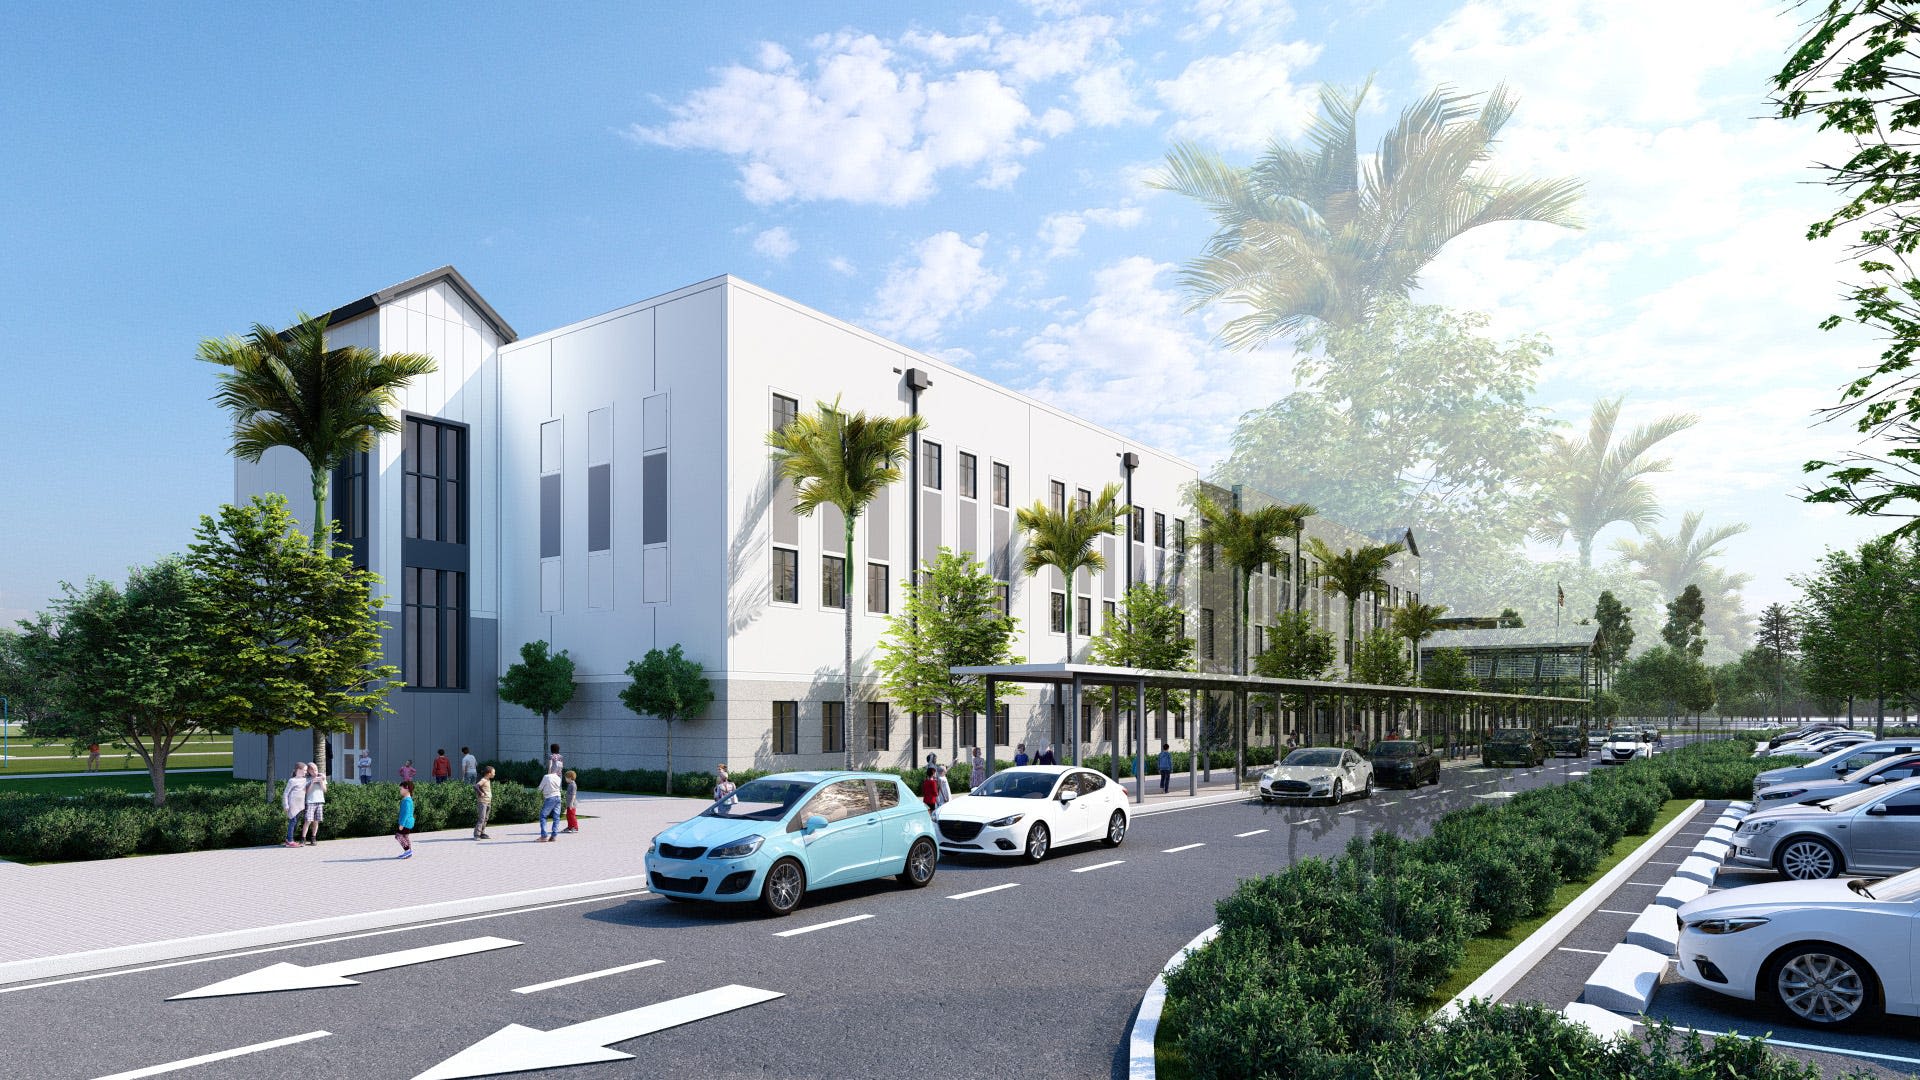 Palm Beach County's newest elementary school will open early because of growth. Where?